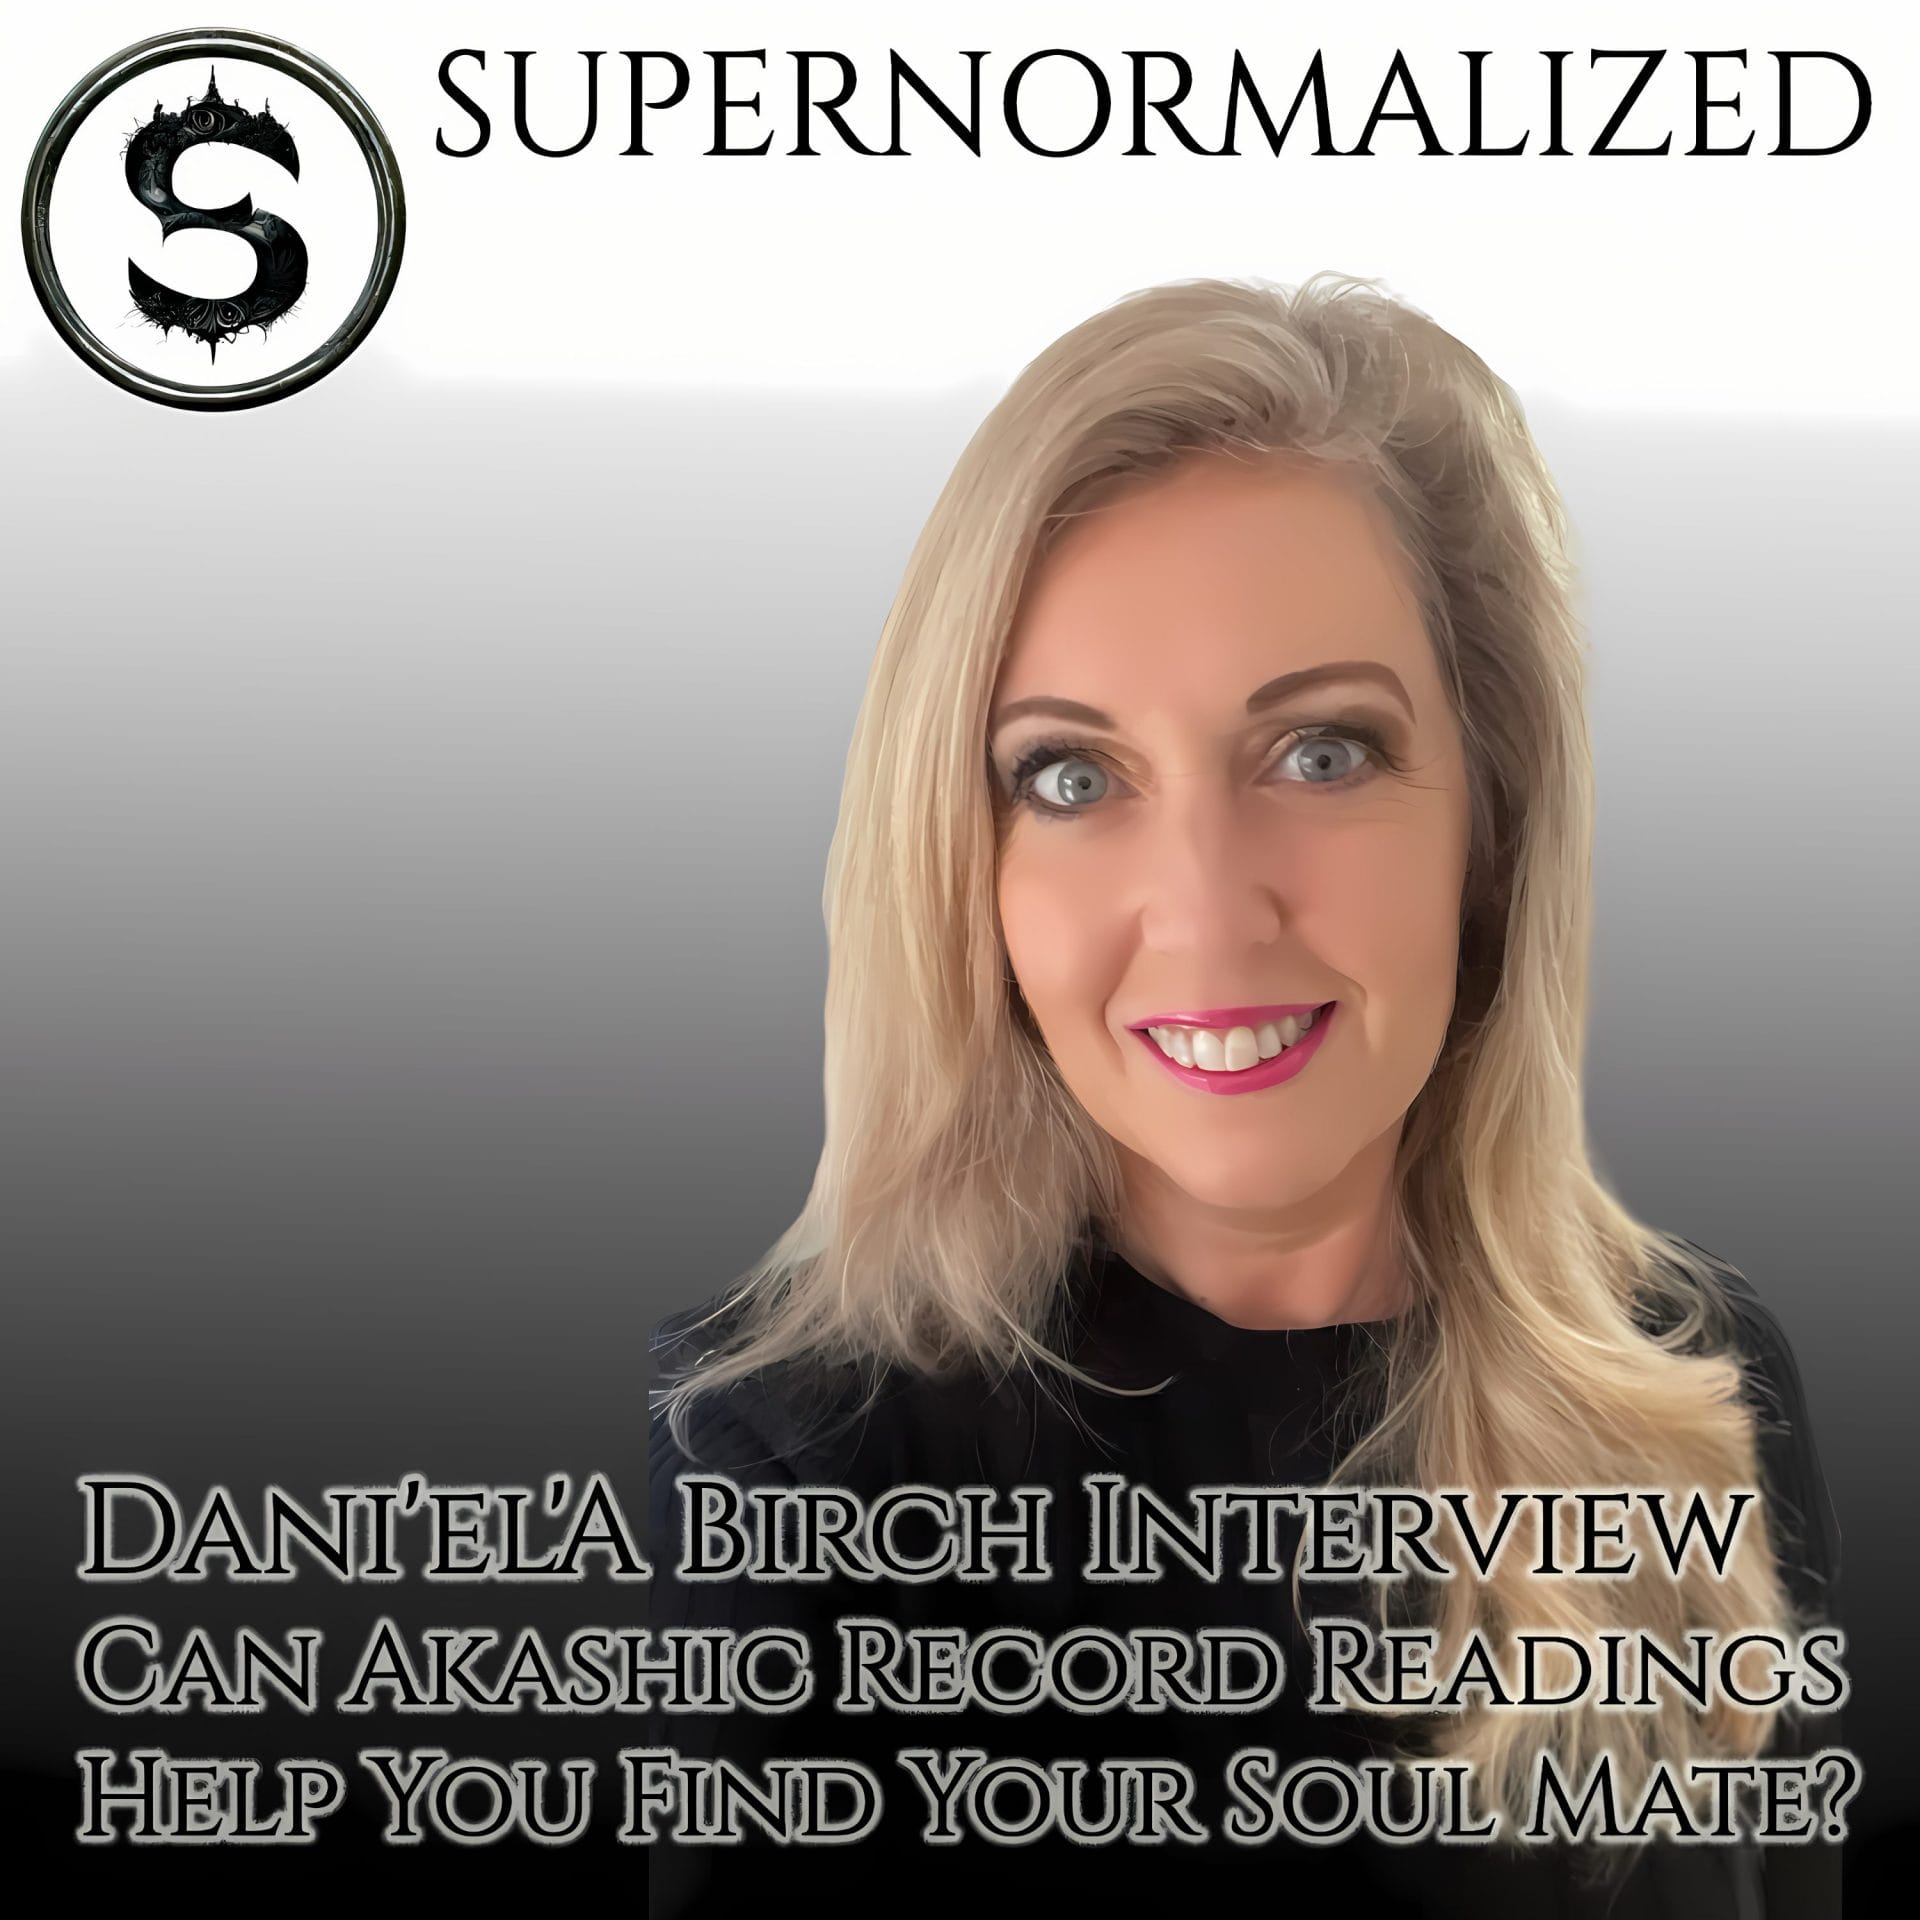 Dani'el'A Birch Interview Can Akashic Record Readings Help You Find Your Soul Mate?